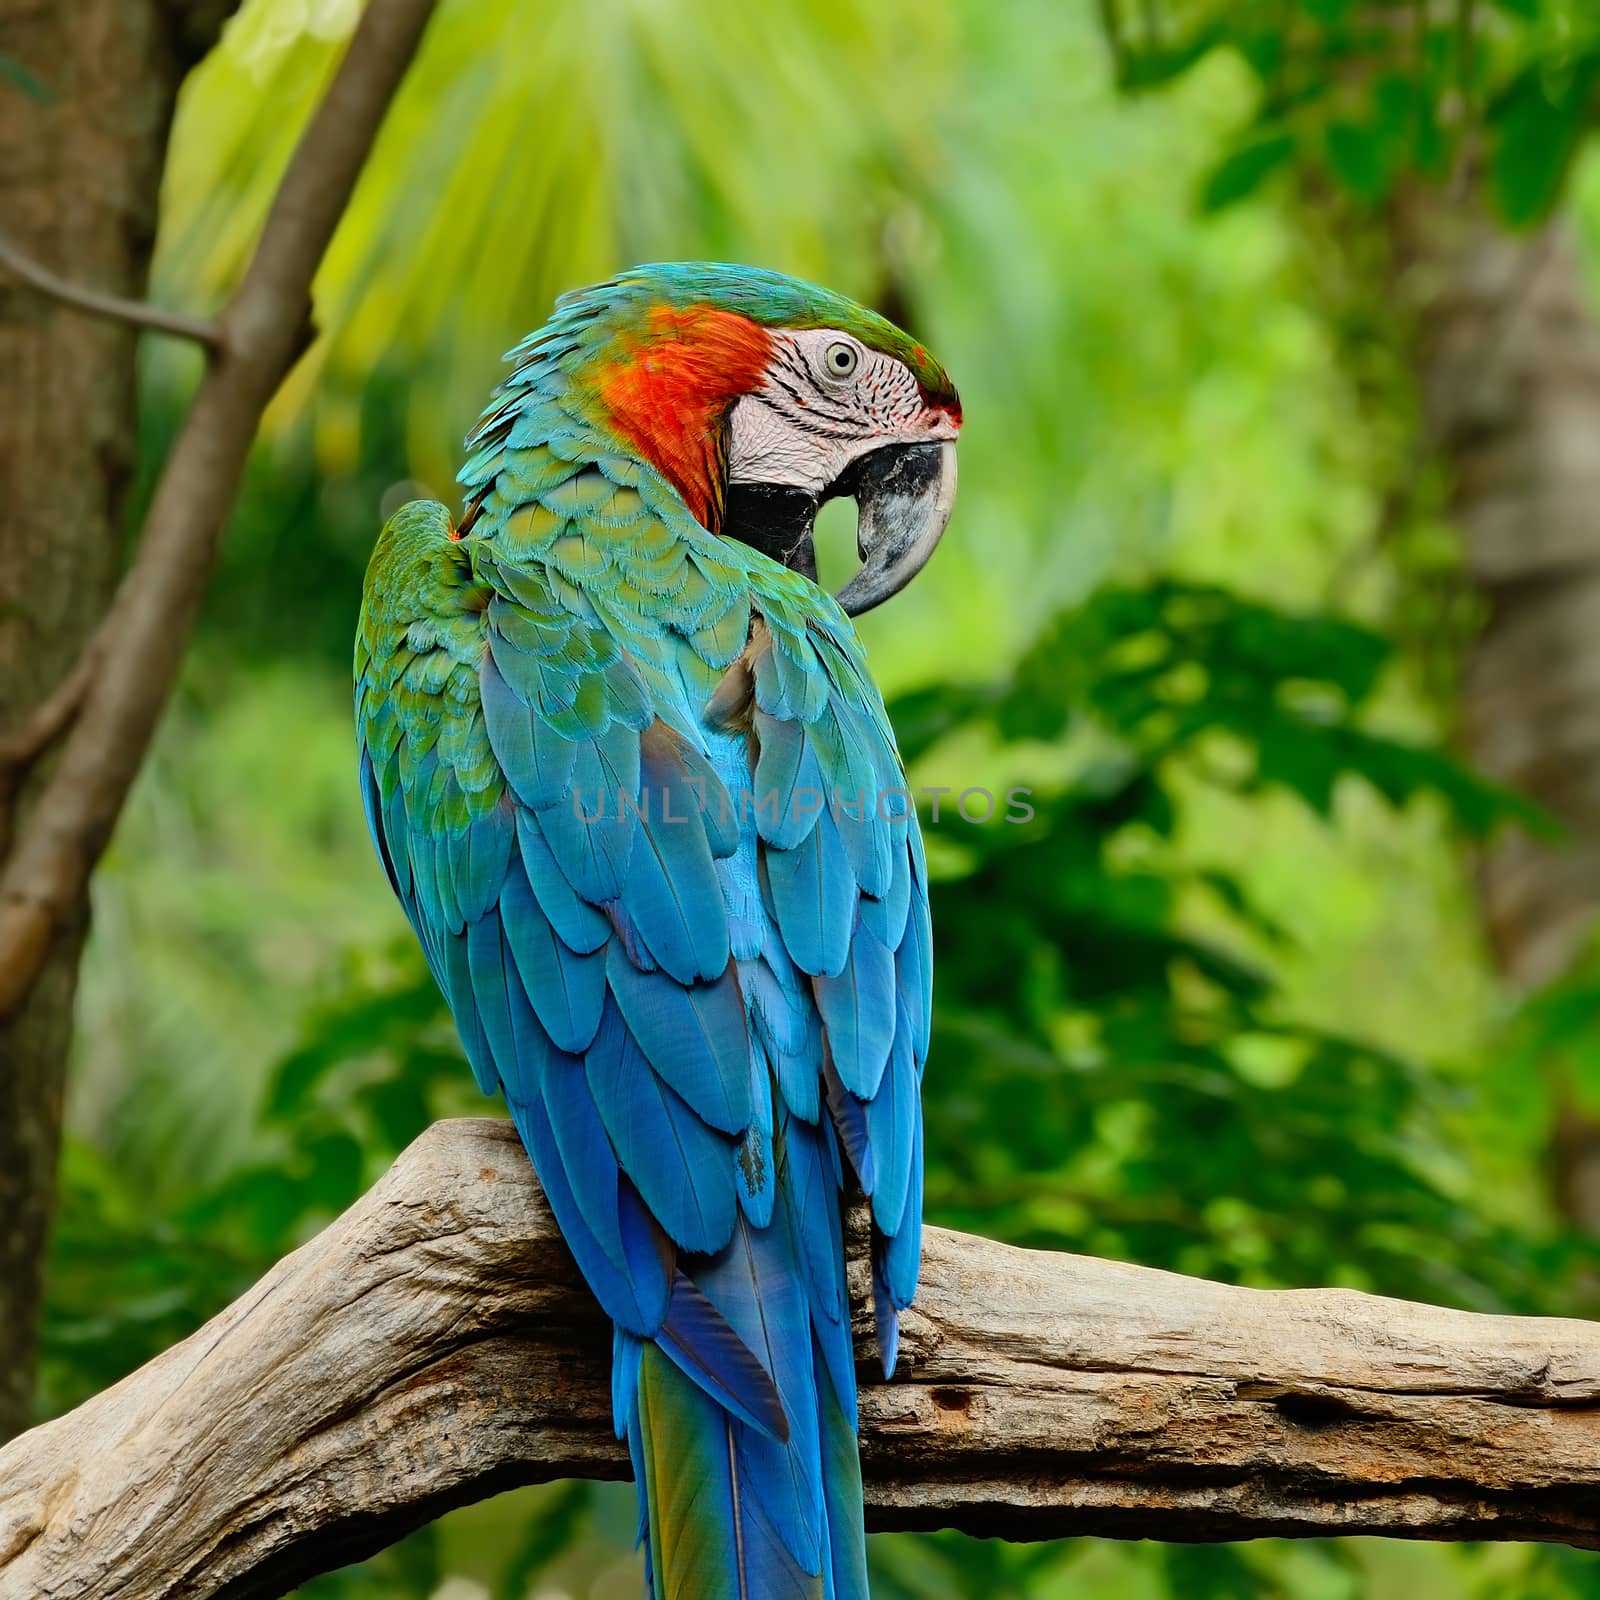 Colorful Harlequin Macaw aviary, sitting on the log, back profile